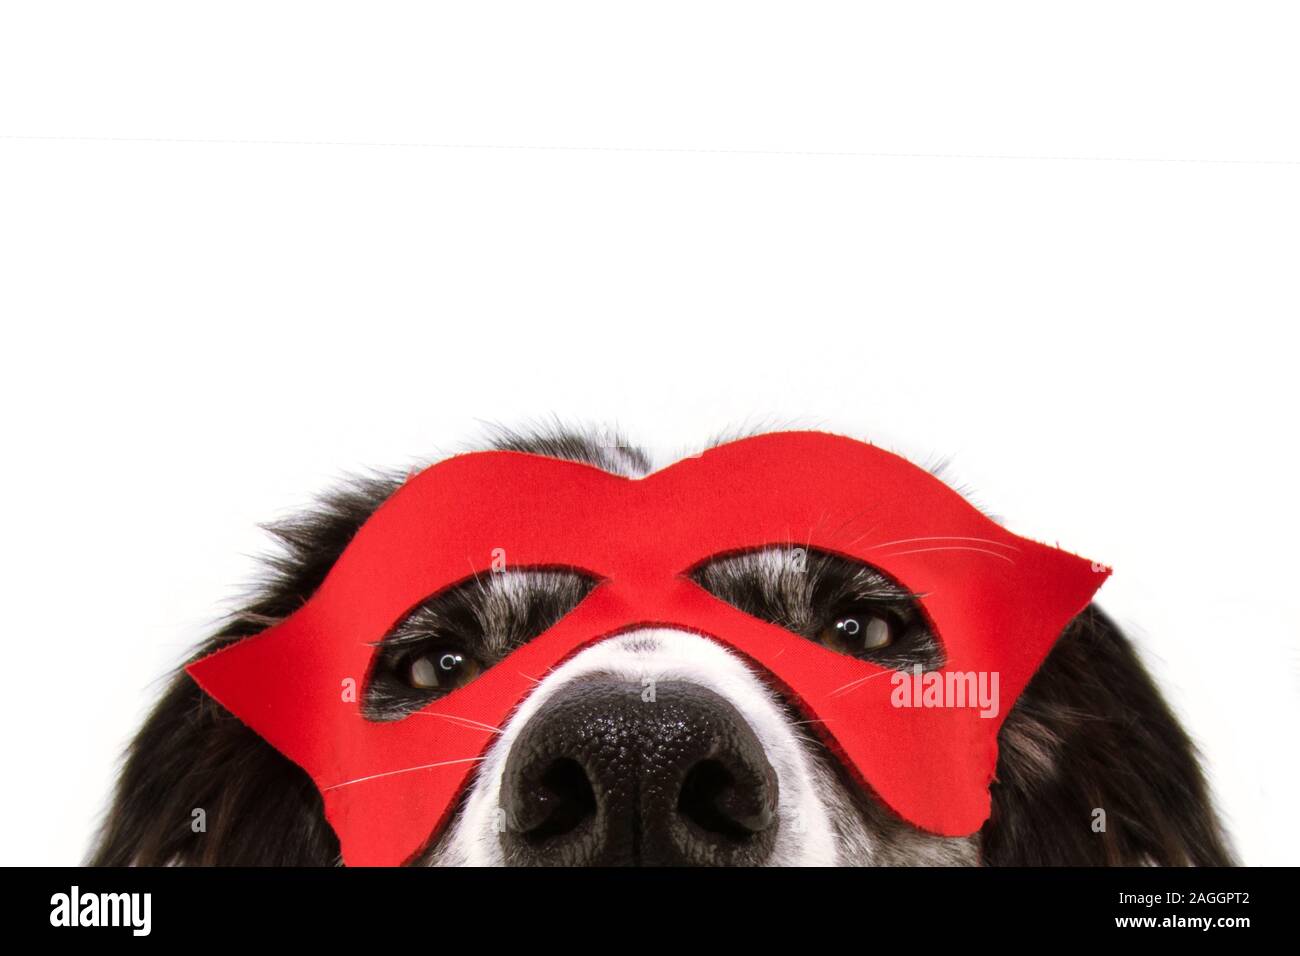 close-up dog pet costume hero red mask and cape costume. carnival or halloween costume. Isolated on white background. Stock Photo